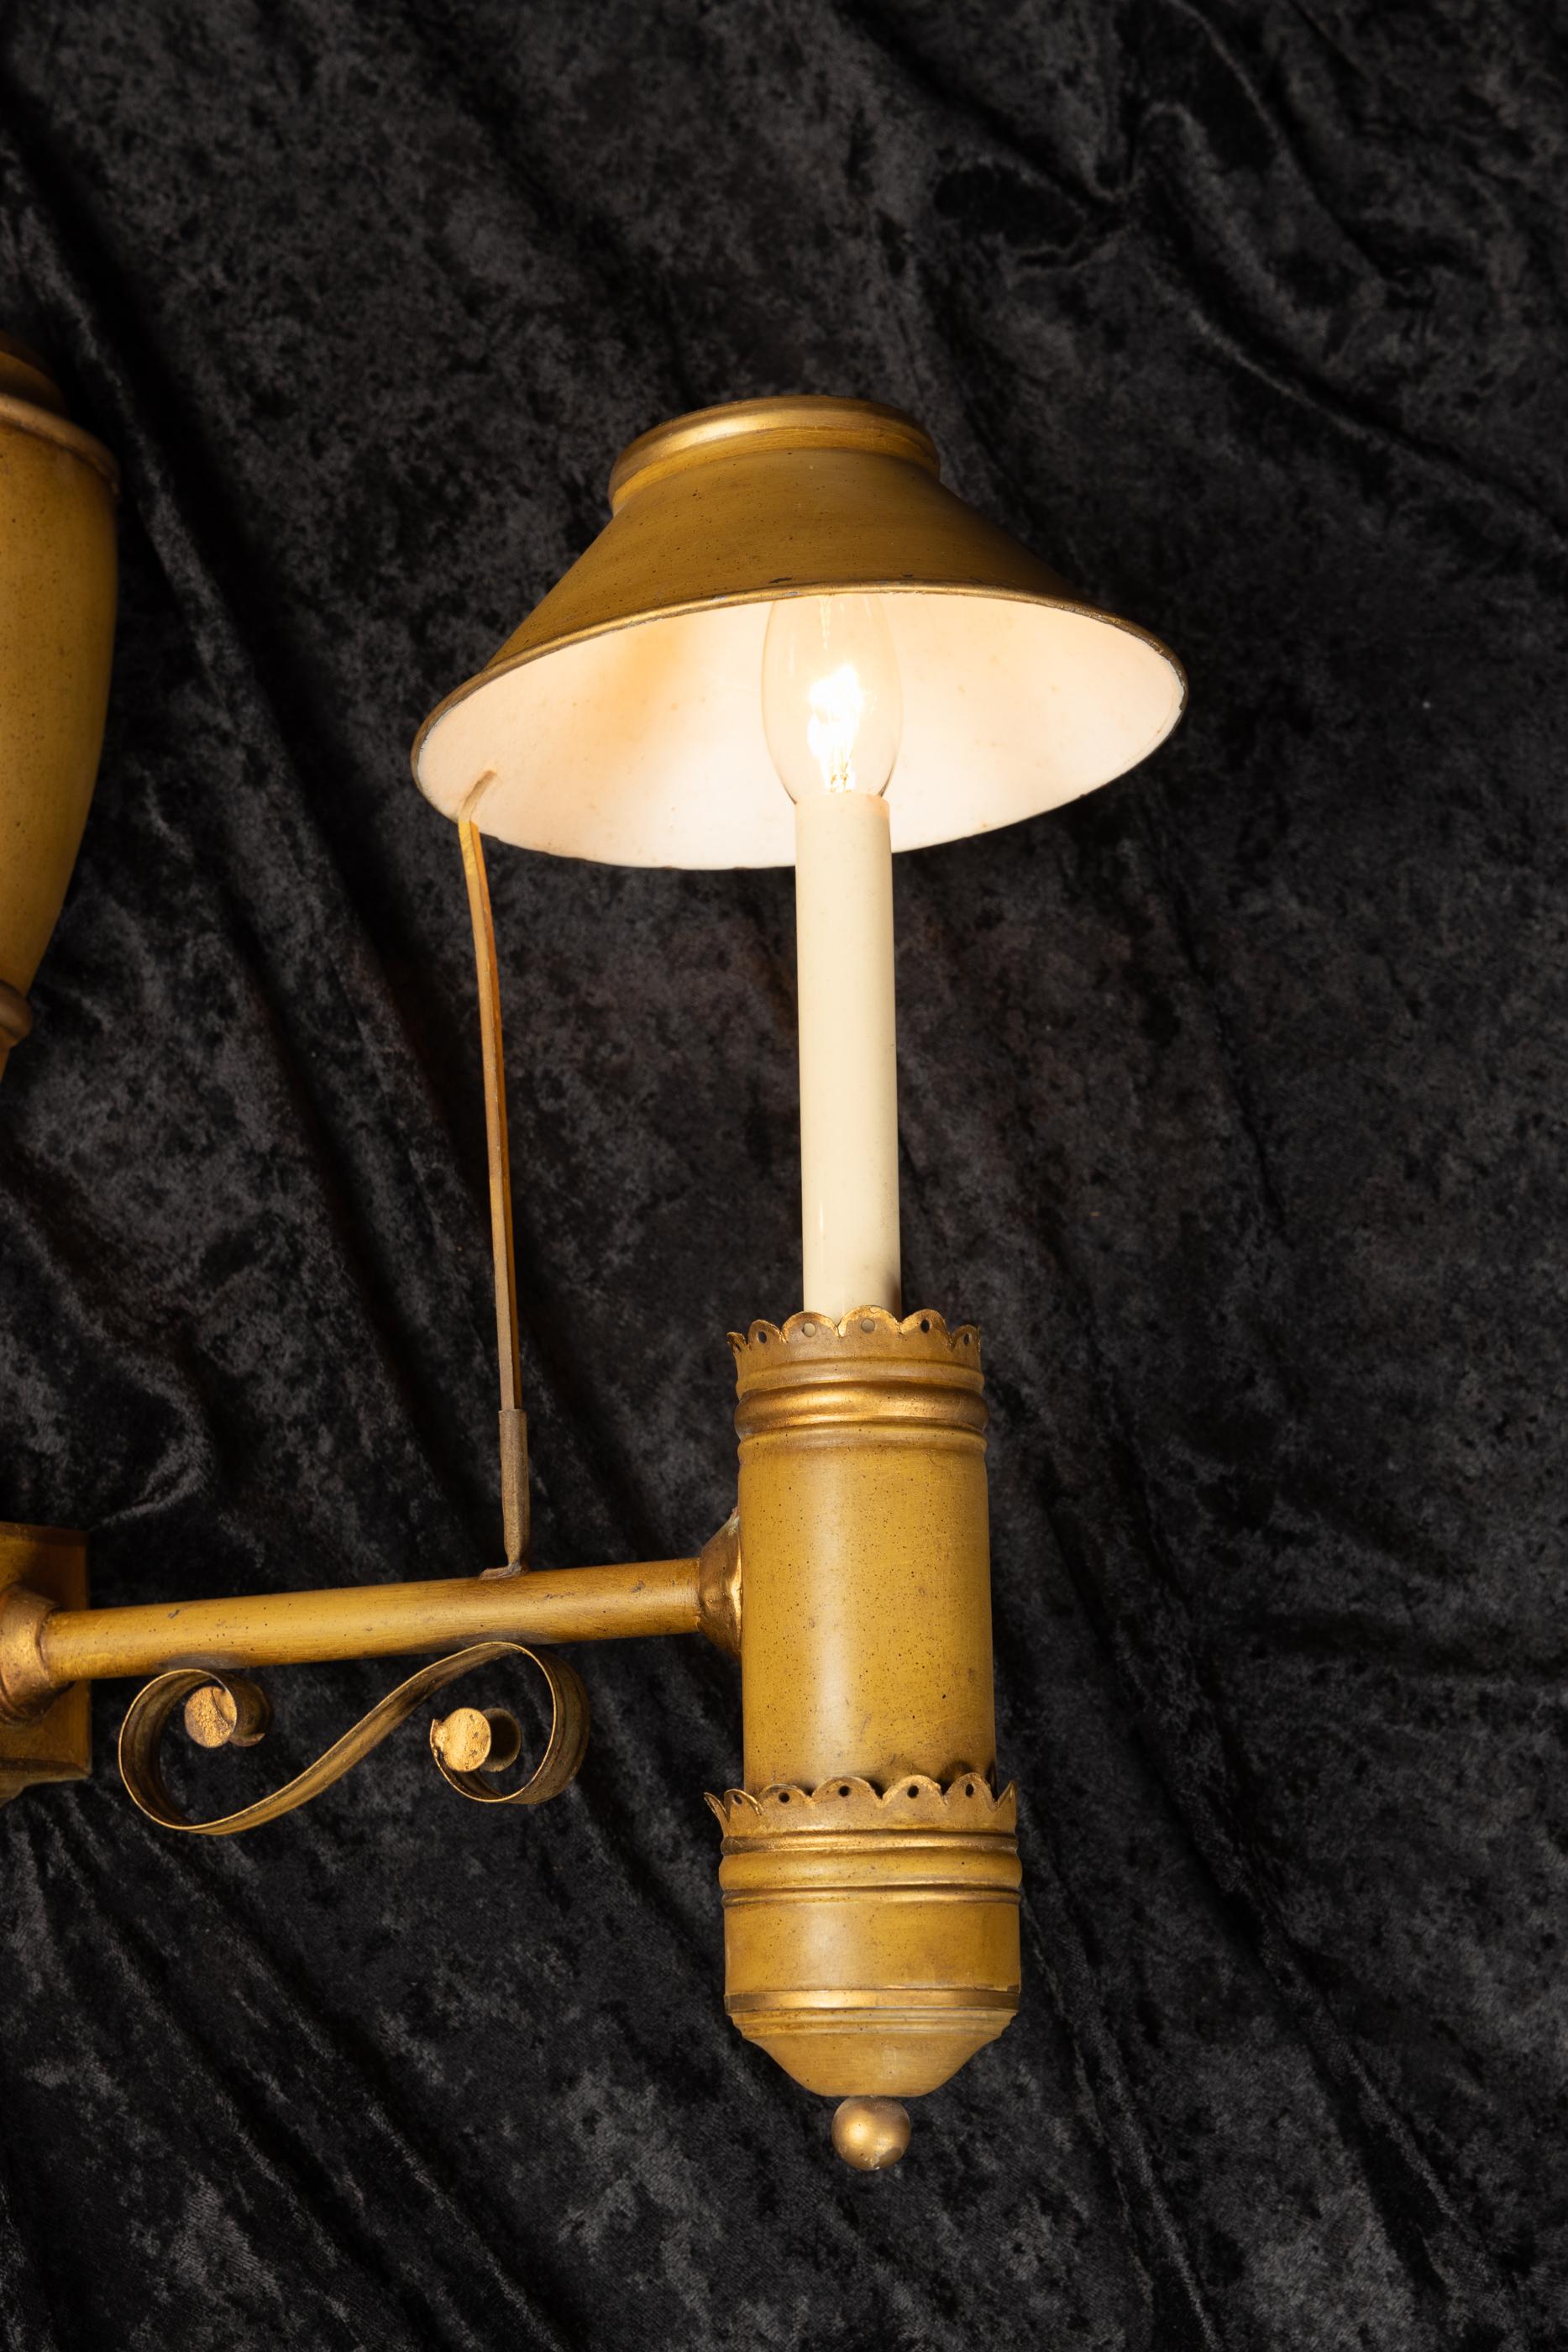 Large Pair of Italian Mid-20th Century Tole Sconces with Light Shades In Good Condition For Sale In New Orleans, LA